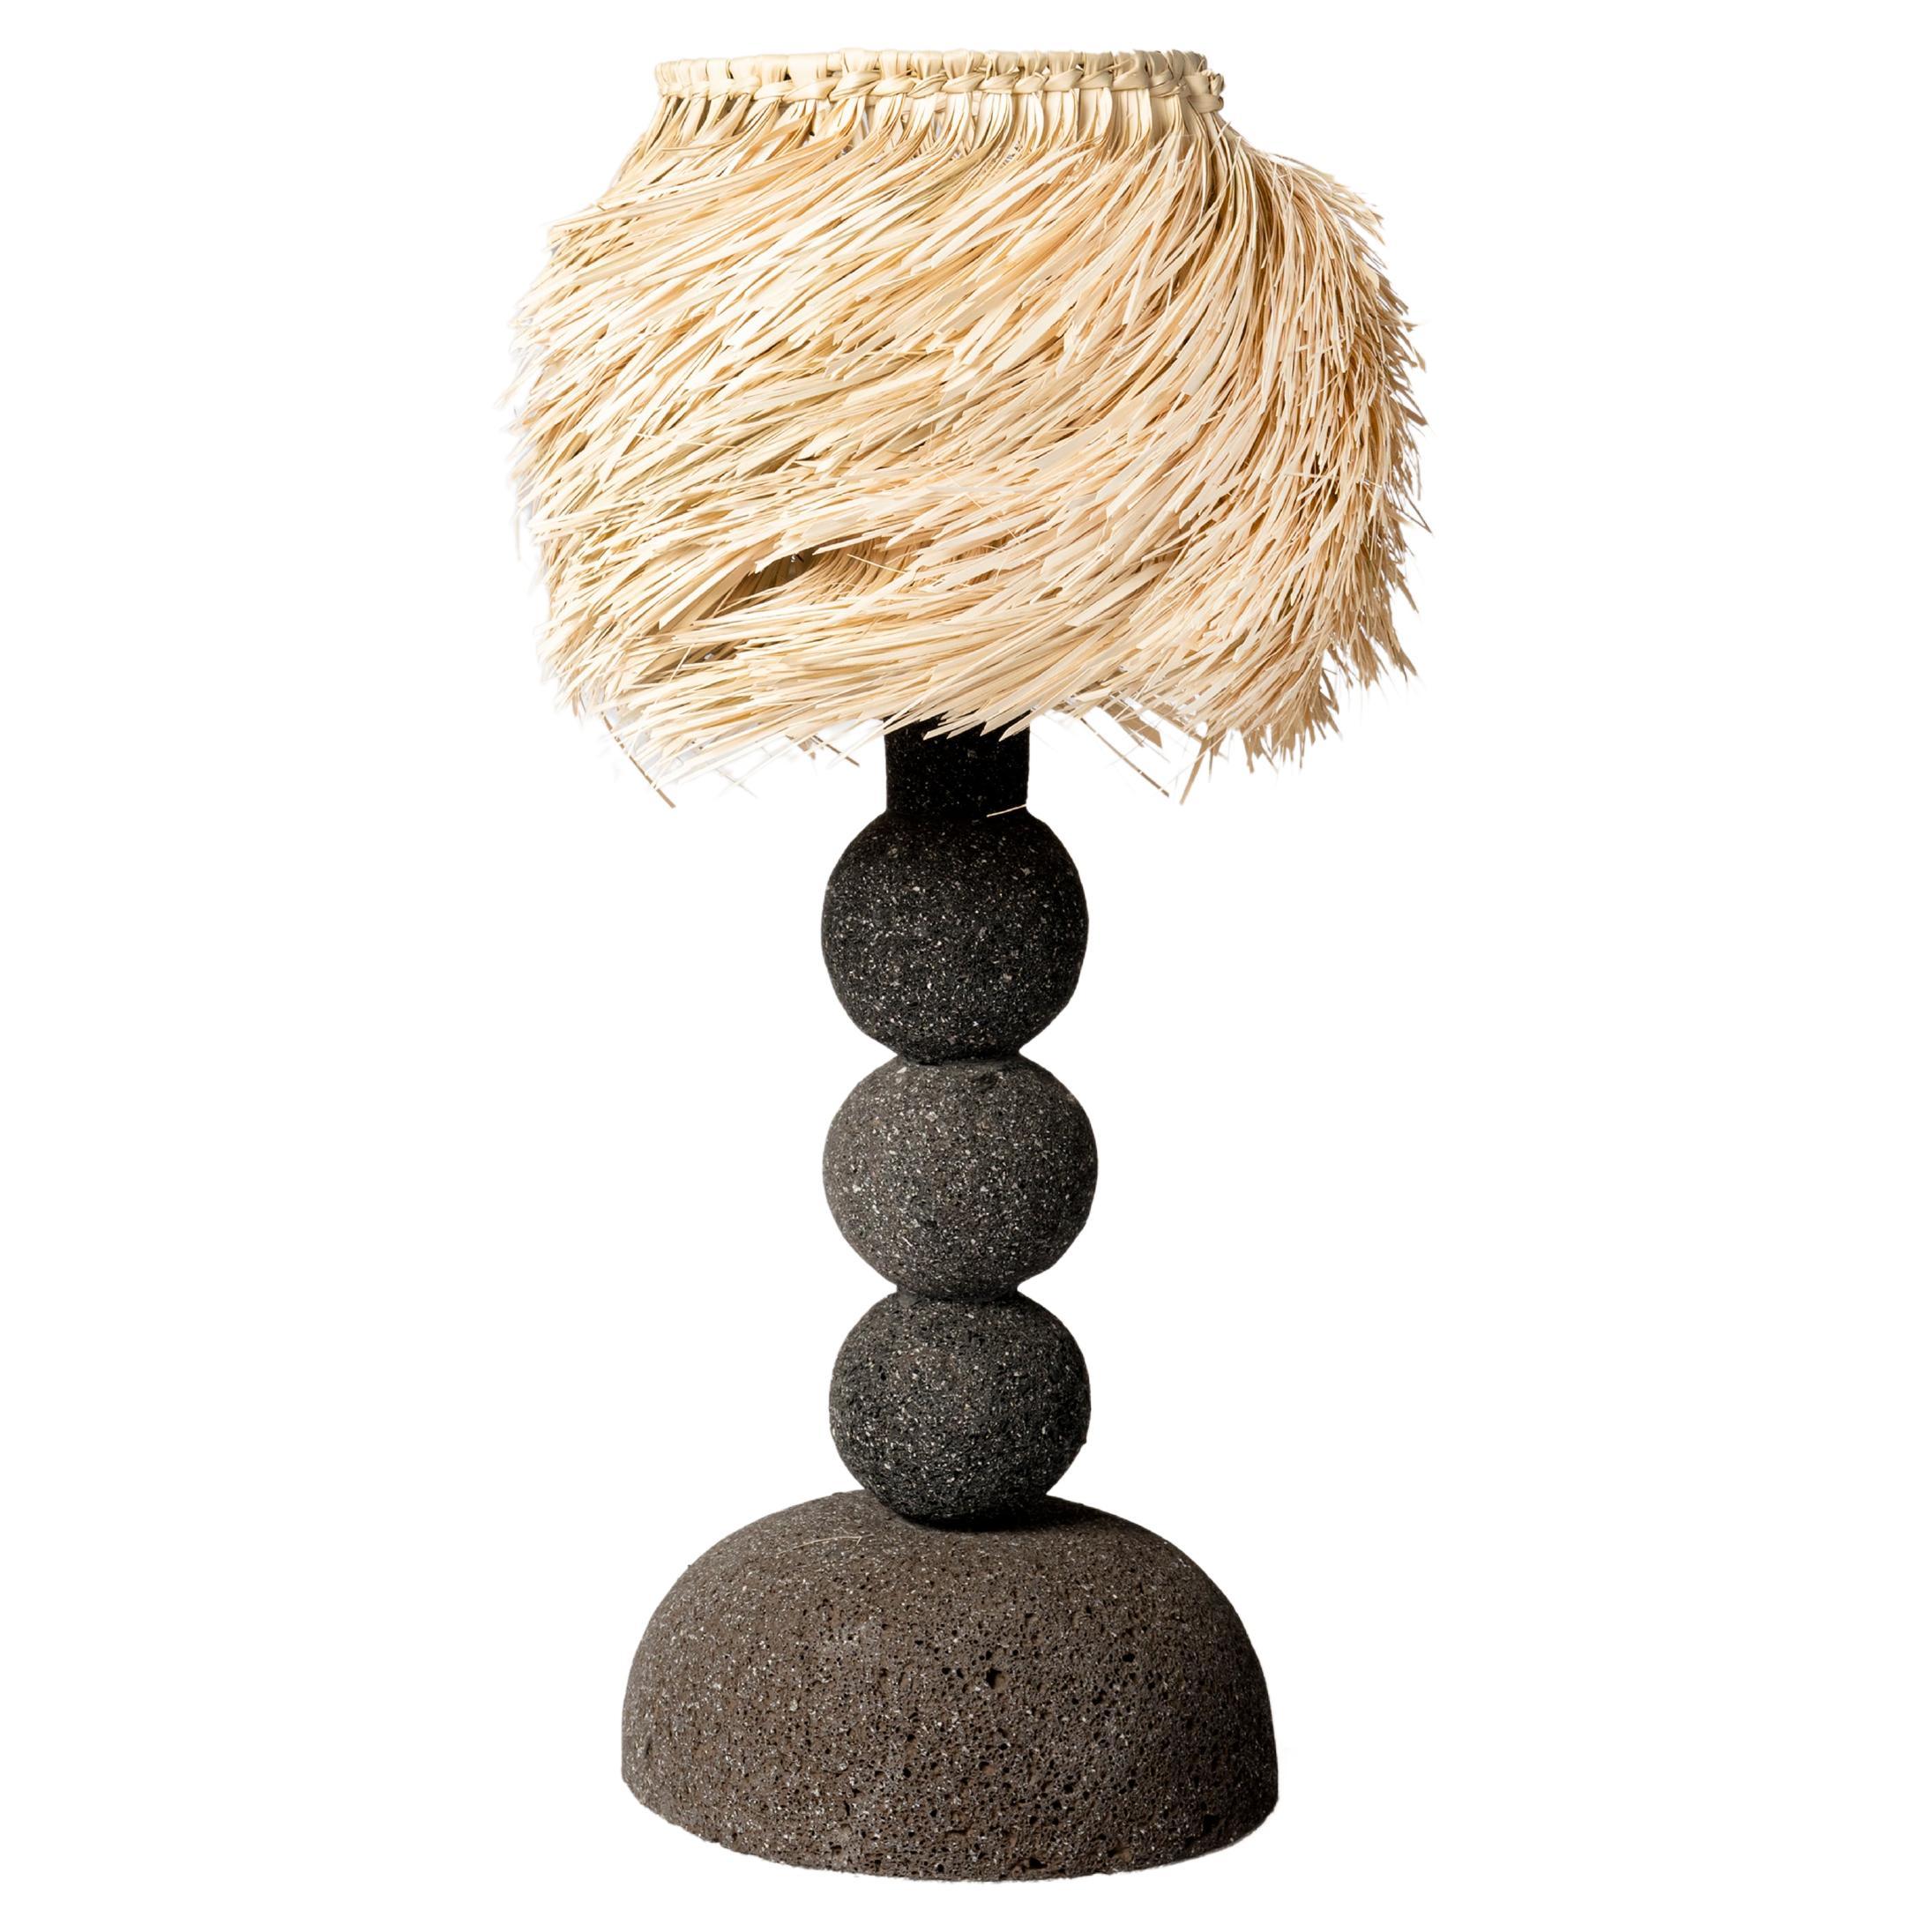 Volcanic Stone Spheres Desk Lamp with Palm Screen by Daniel Orozco For Sale